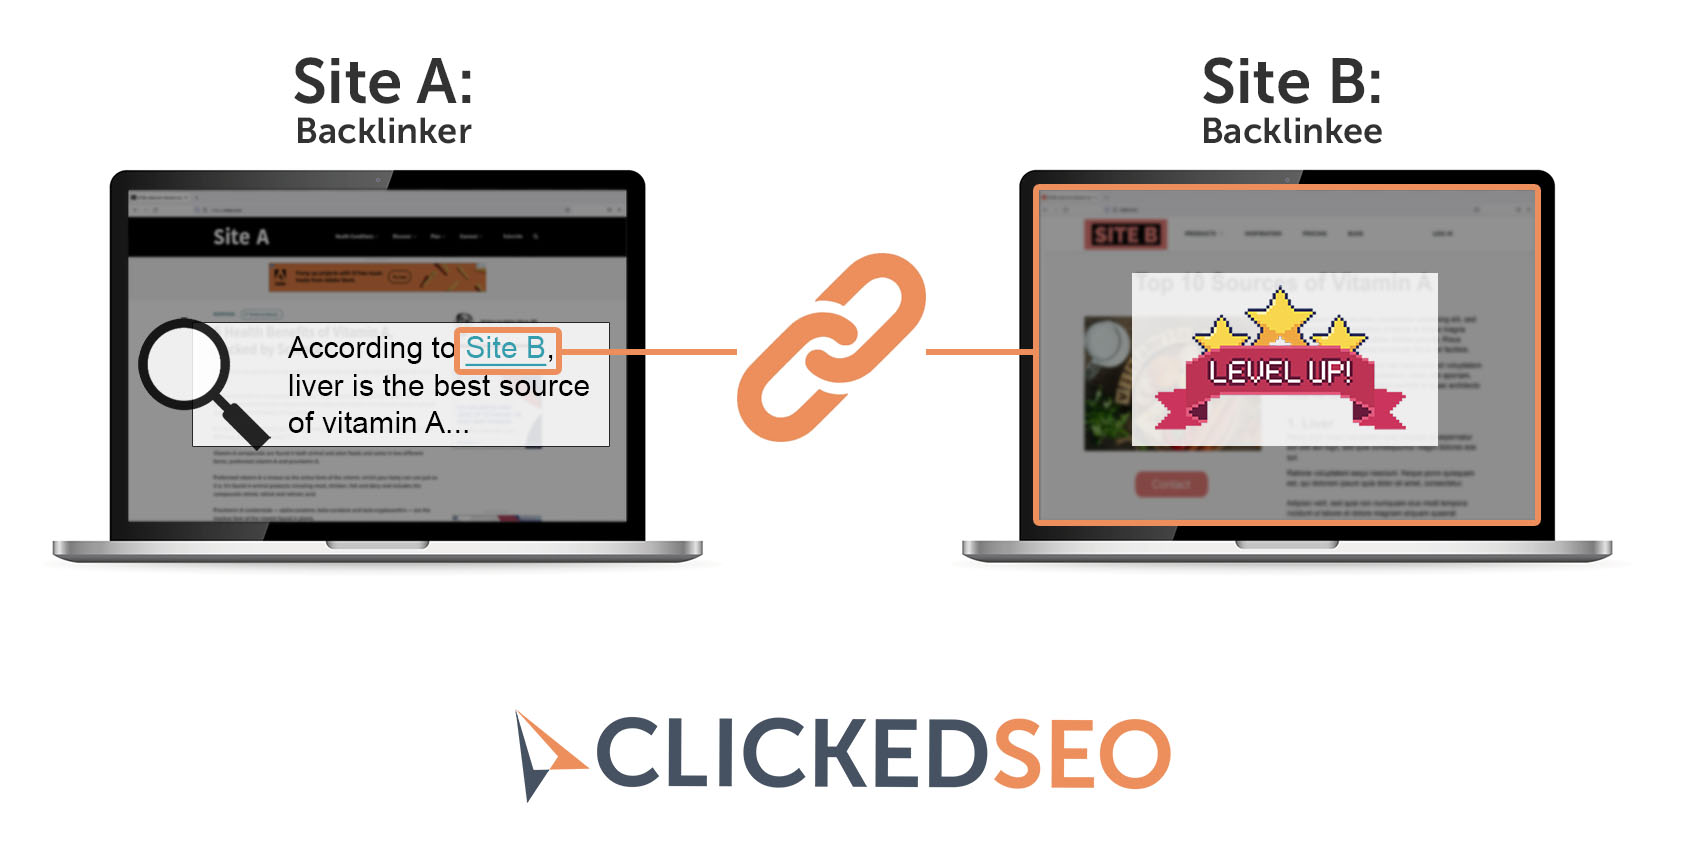 infographic illustrating what an SEO backlink is. It contains 2 laptops, the laptop on the left, the backlinker, shows 